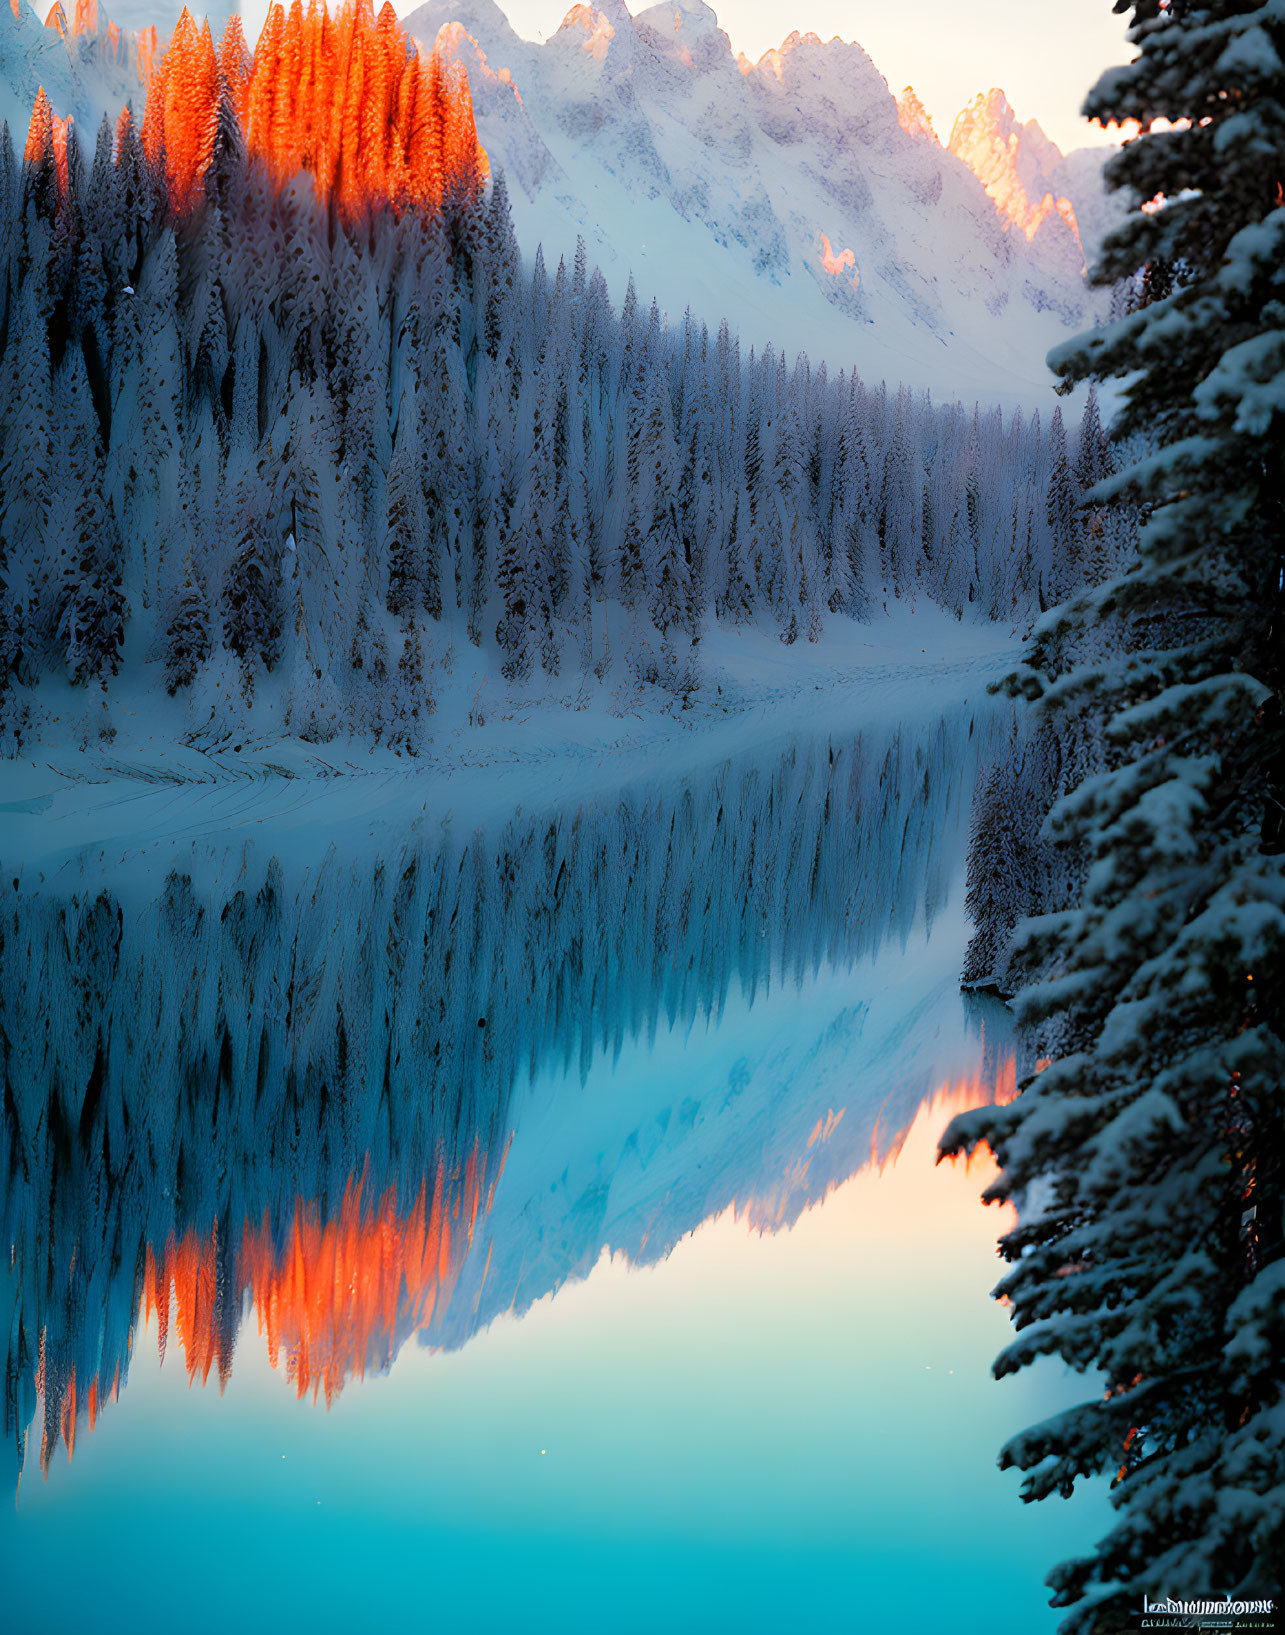 Serene snow-fringed forest reflected in glassy lake at dusk